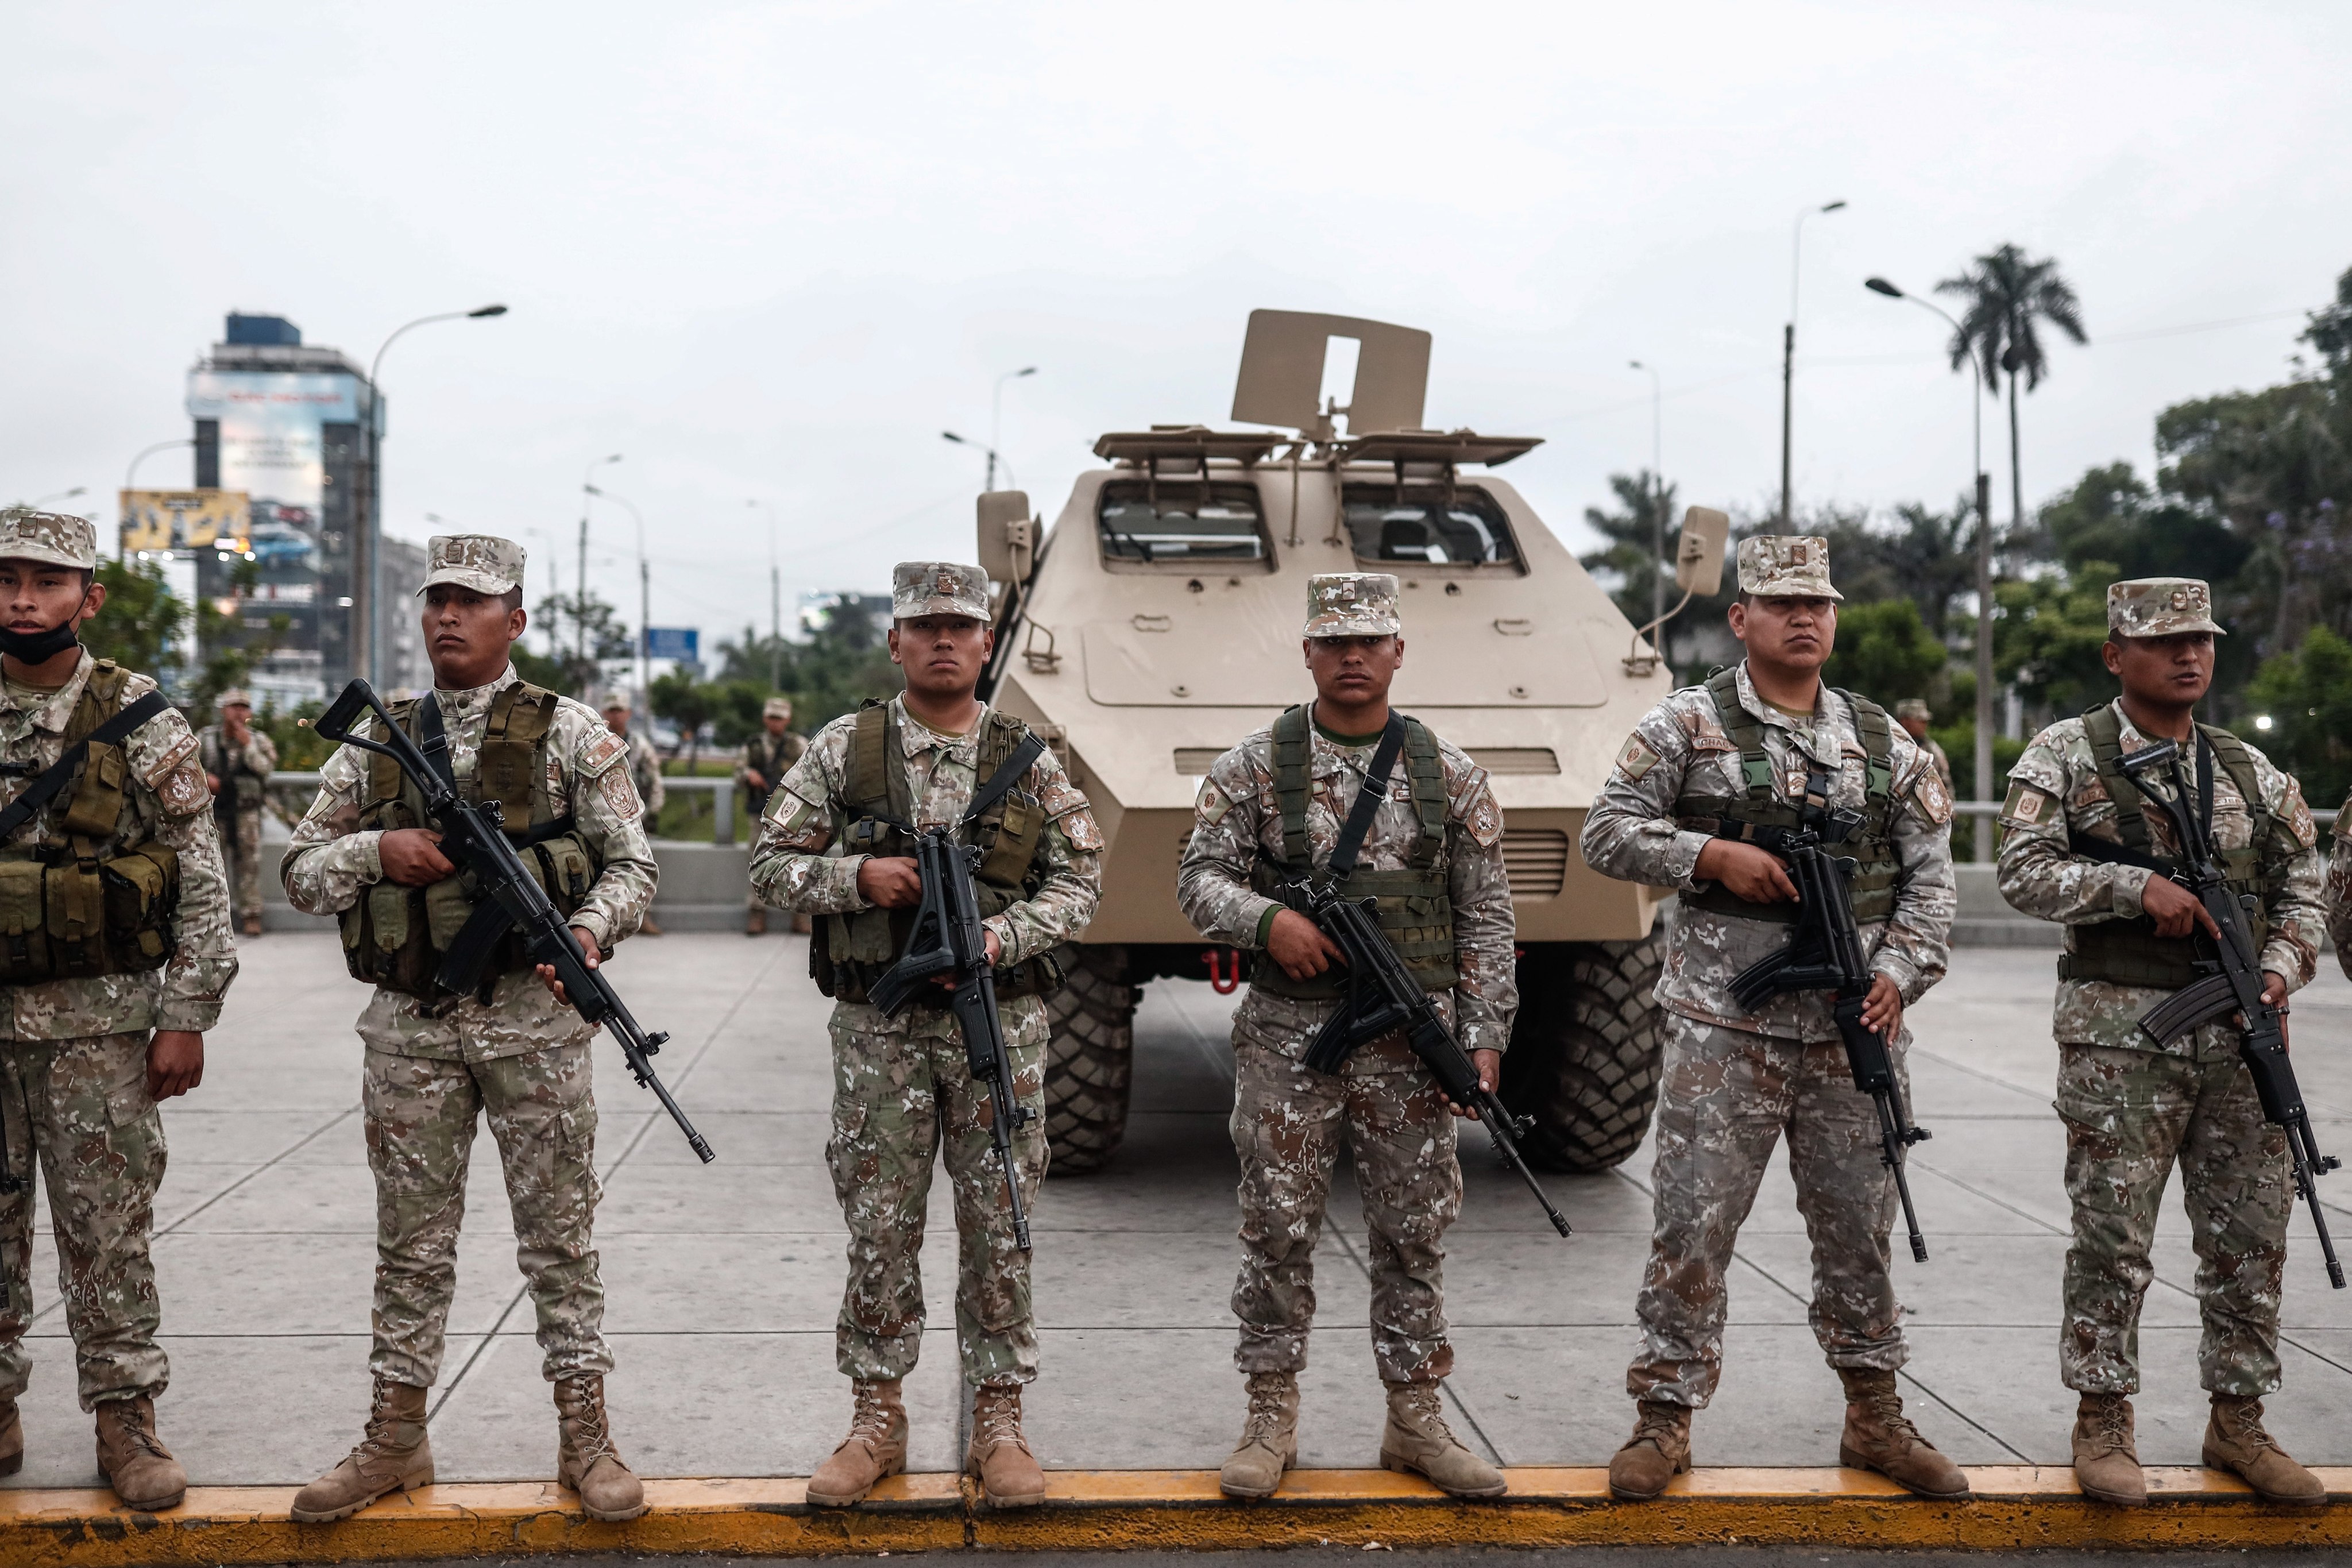 Thousands of agents of the Peruvian National Police and armed forces have been deployed to counter protestors. Photo: EPA-EFE